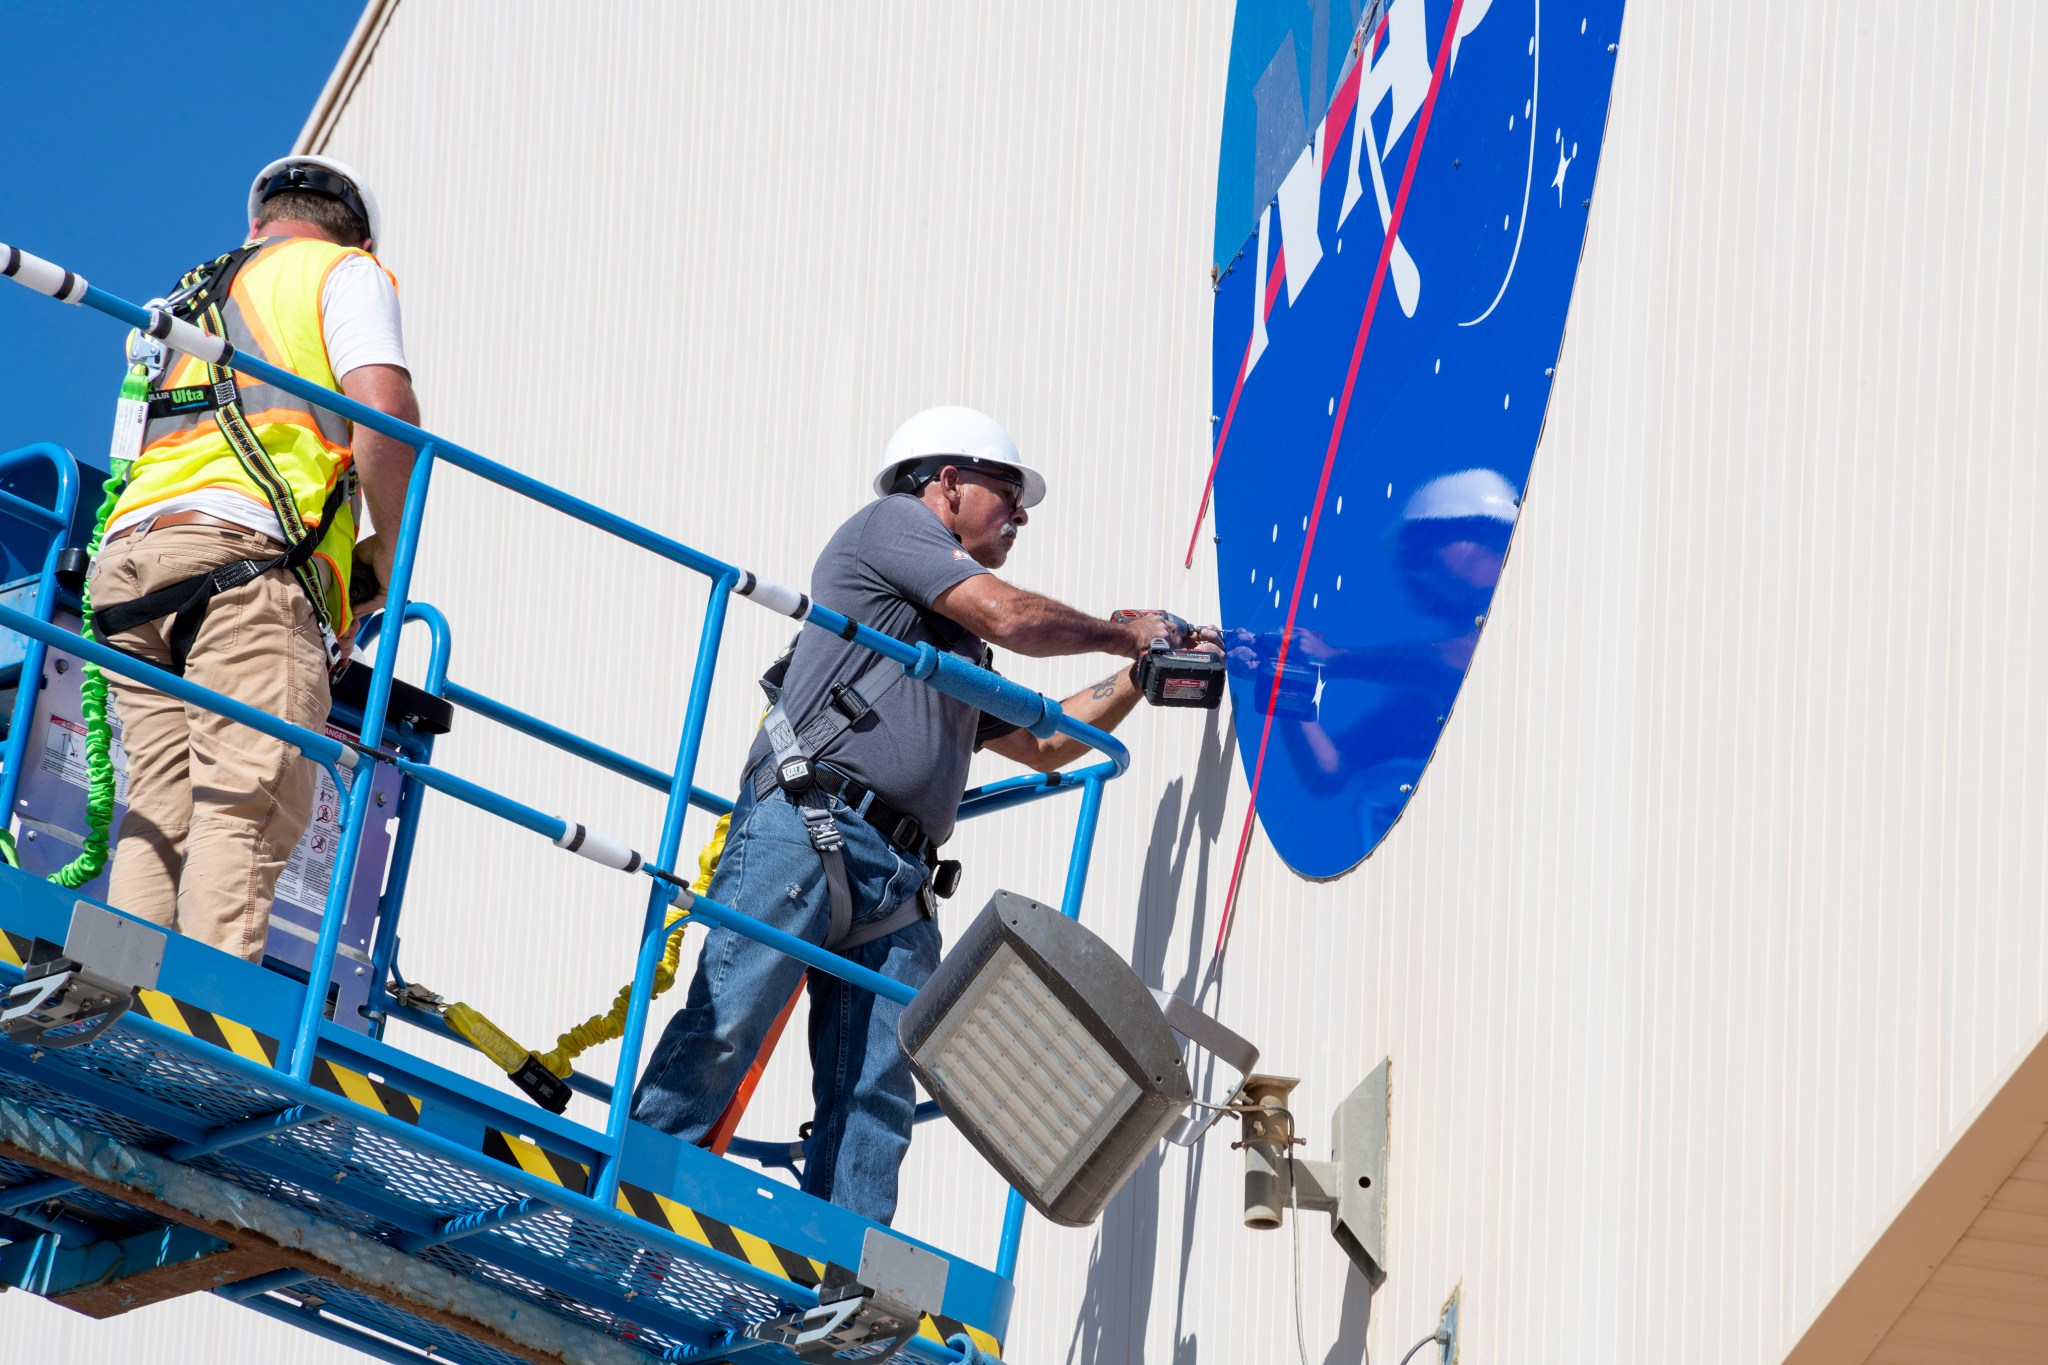 Two workers replace the NASA meatball sign on the side of a building.